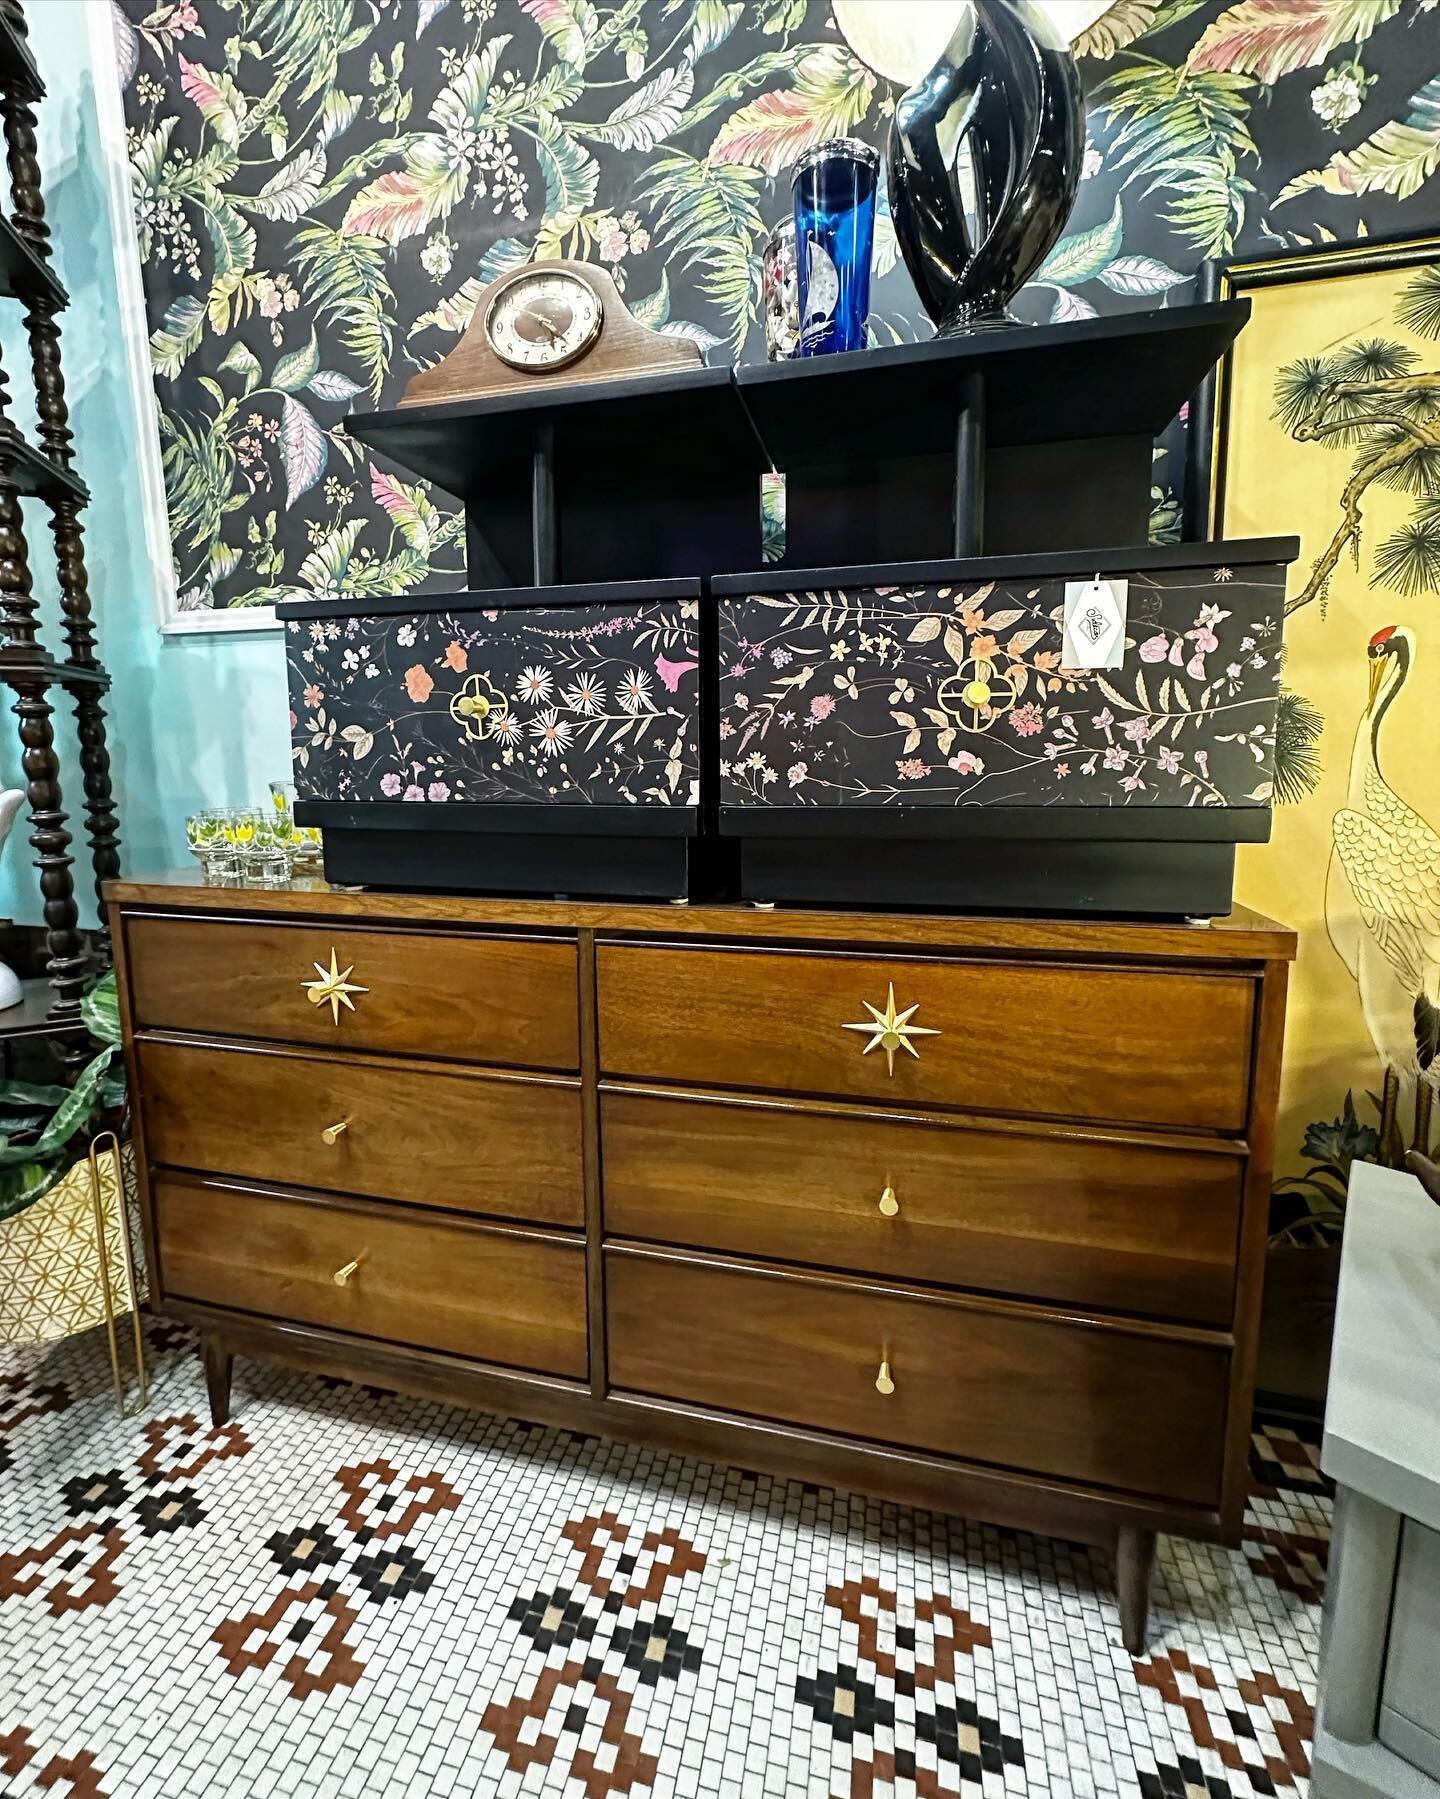 We added a little extra vintage flair to this mid century dresser with these awesome drawer pulls! 54&rdquo; long x 31.5&rdquo; high x 18&rdquo; deep $425-